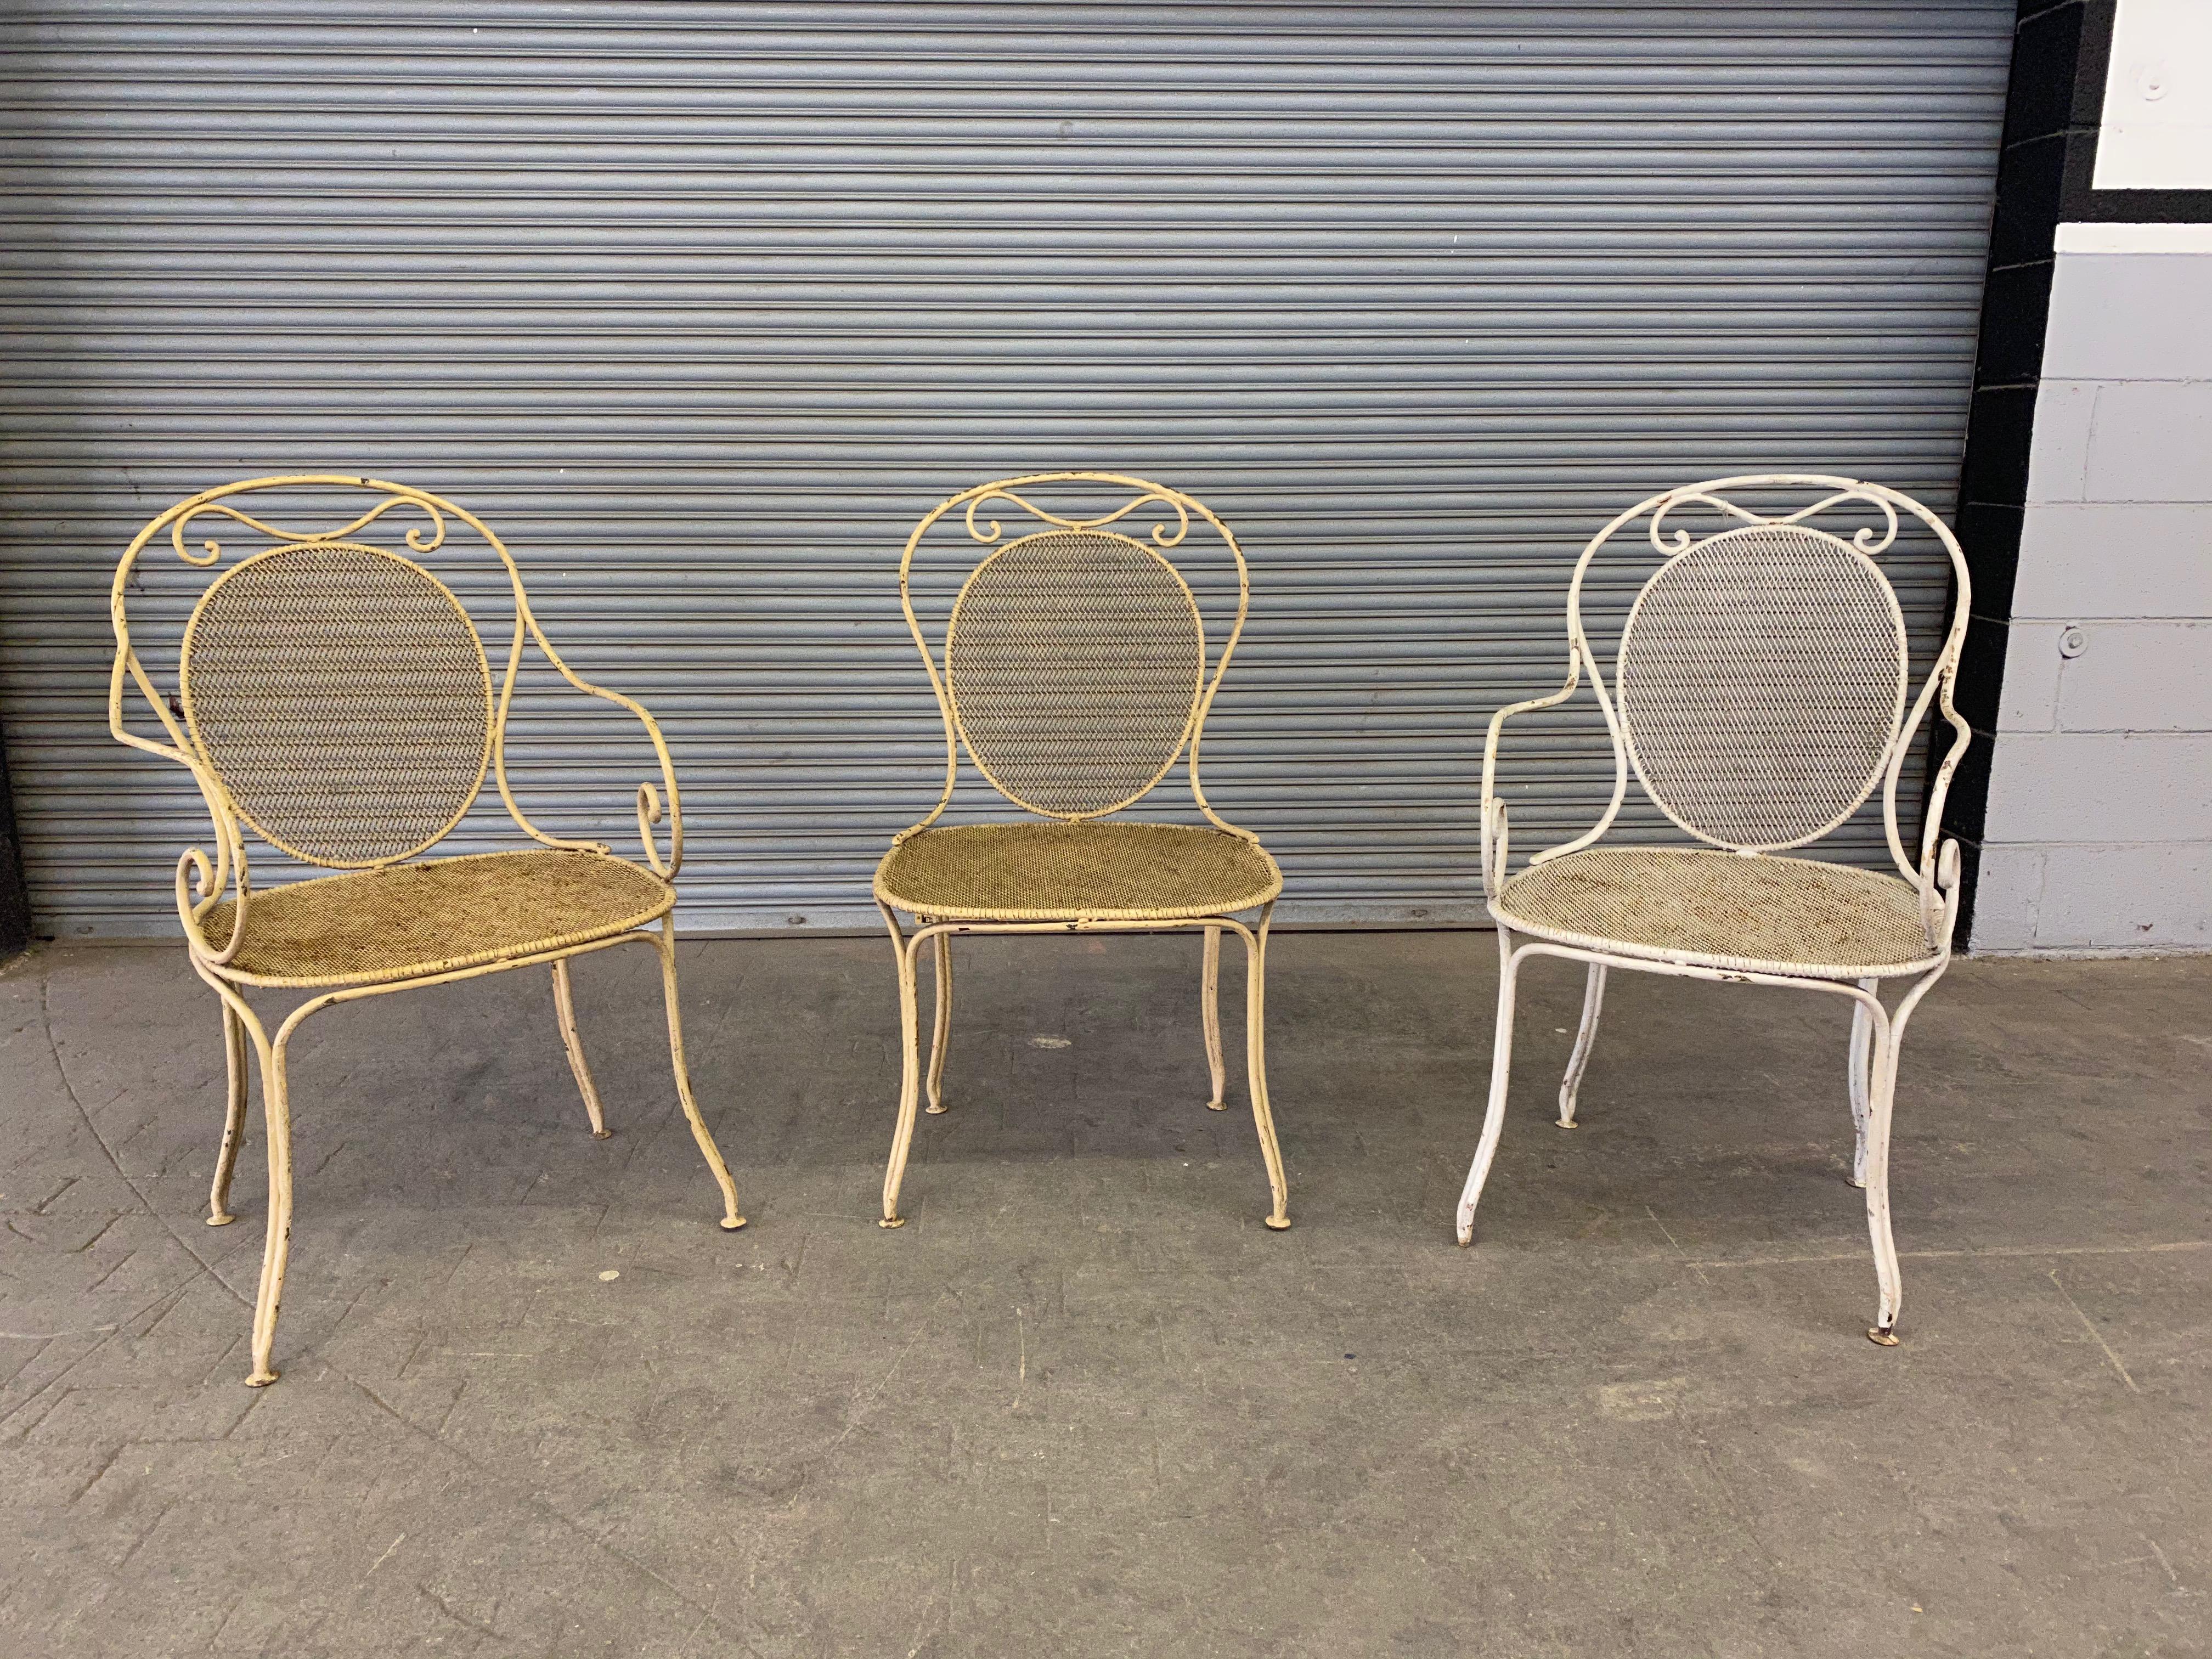 Early 20th Century Set of Seven French Iron Garden Chairs